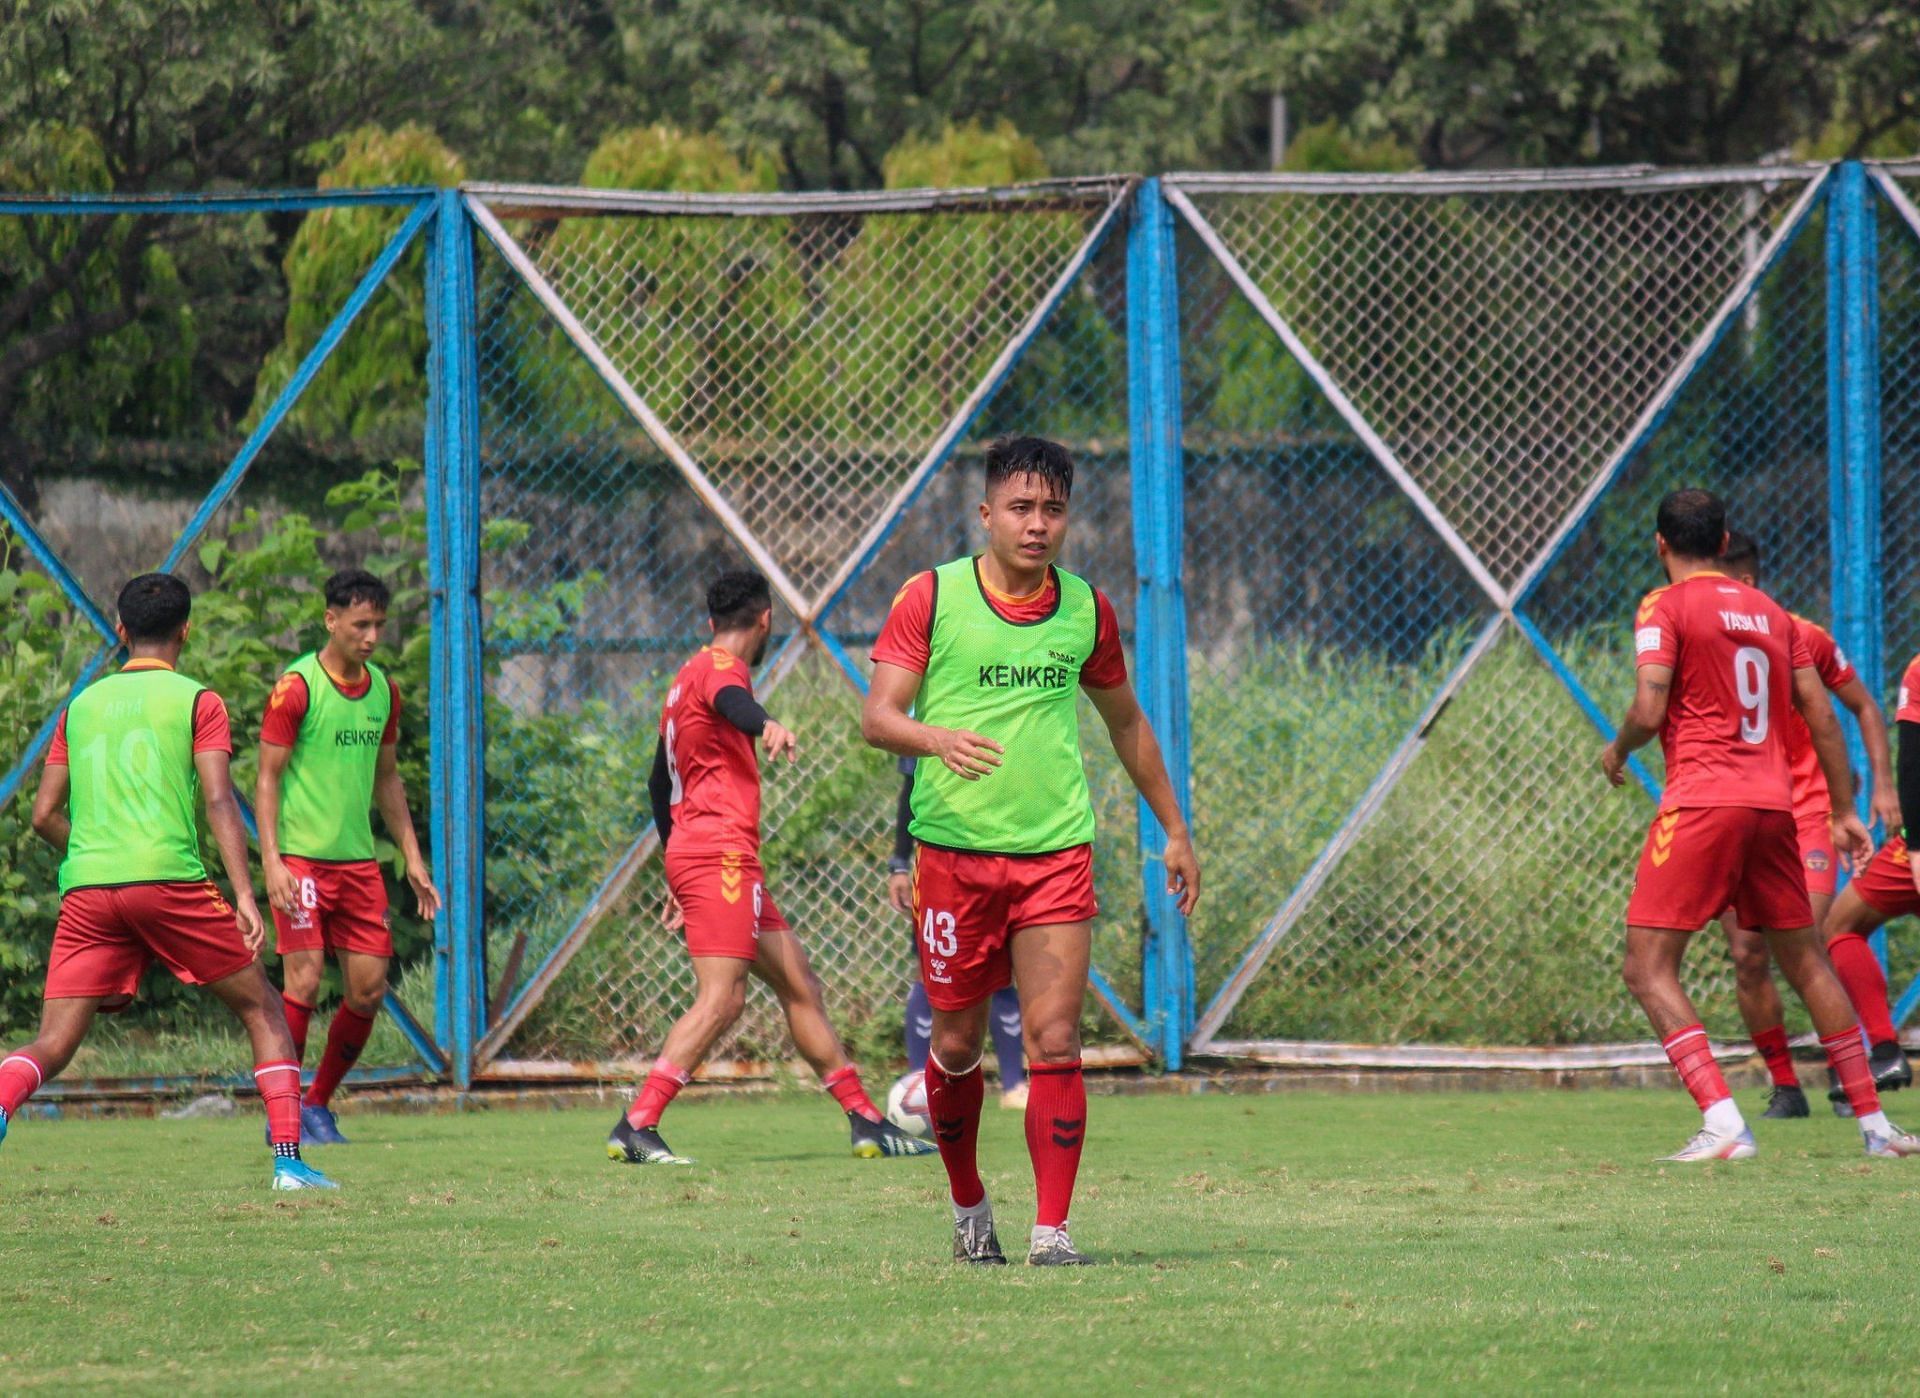 Kenkre FC players training for their game against Aizawl FC. (Image Courtesy: Twitter/@kenkrefootball)